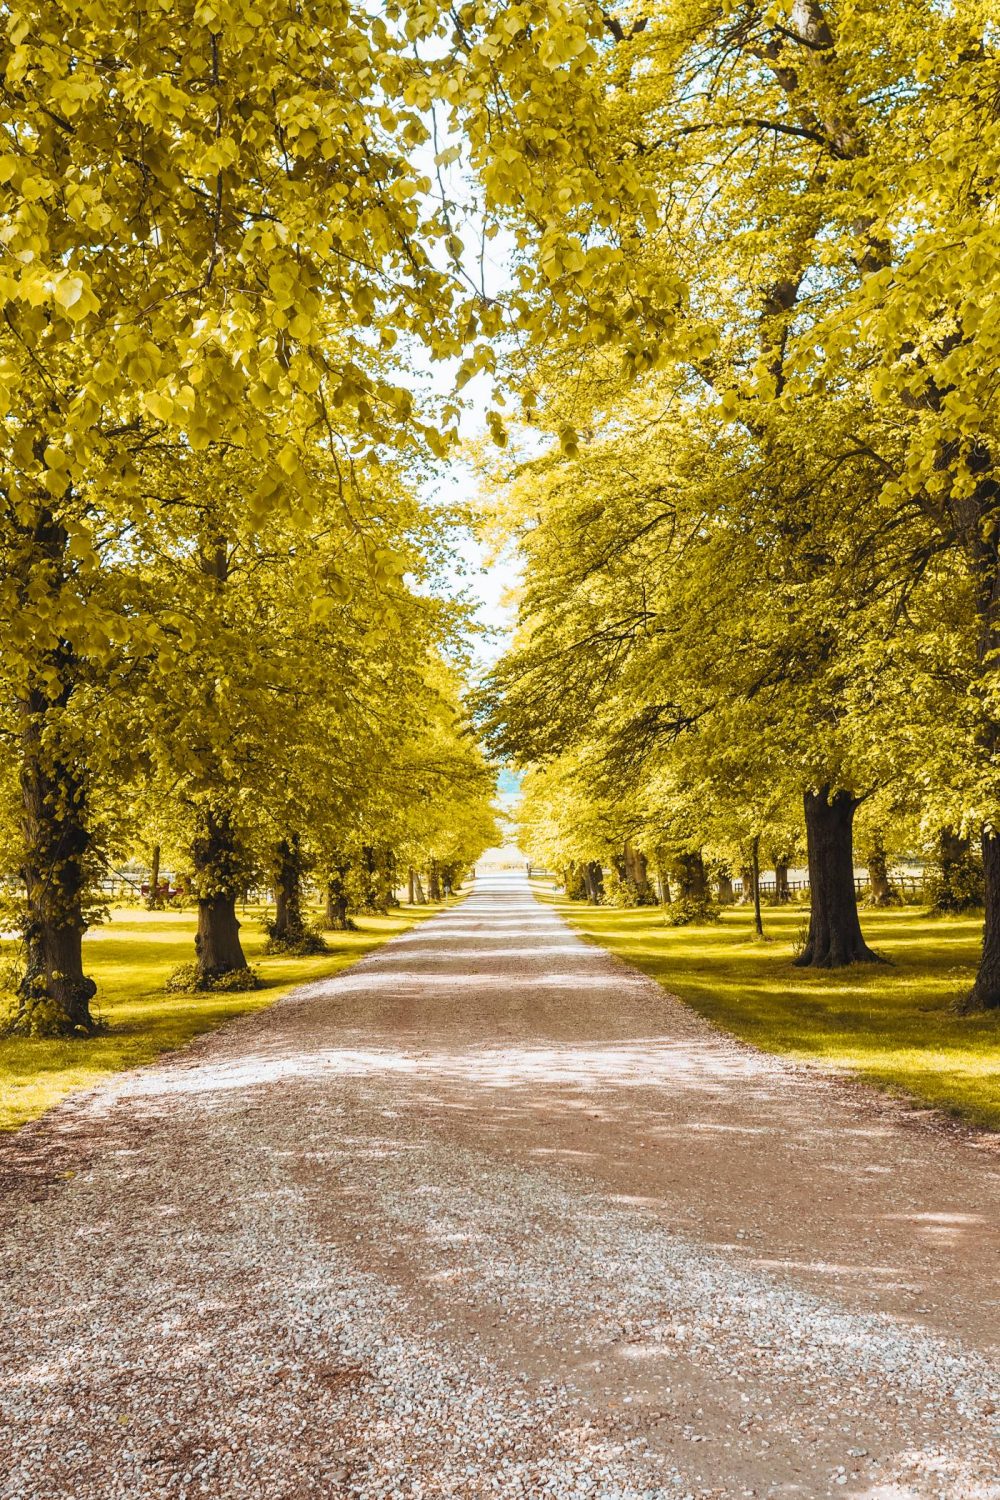 Avenue of trees surrounding the Chichley Hall driveway